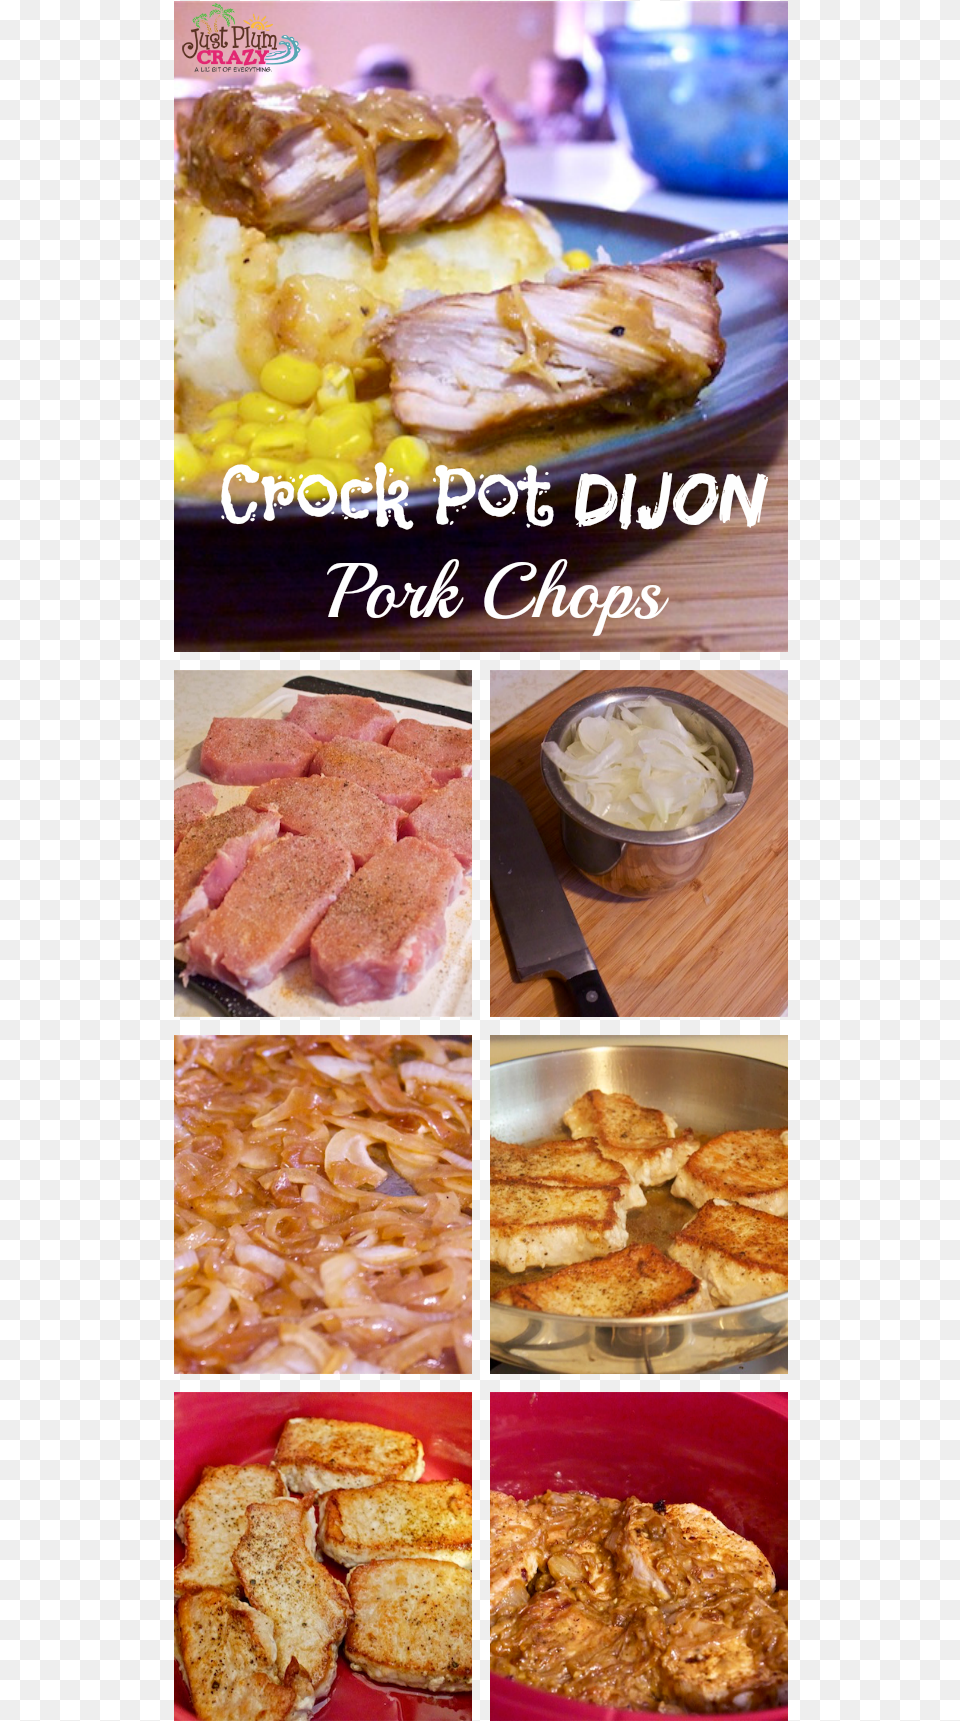 Crock Pot Pork Chops With Caramelized Onion Amp Dijon Banana Bread, Food, Lunch, Meal, Blade Png Image